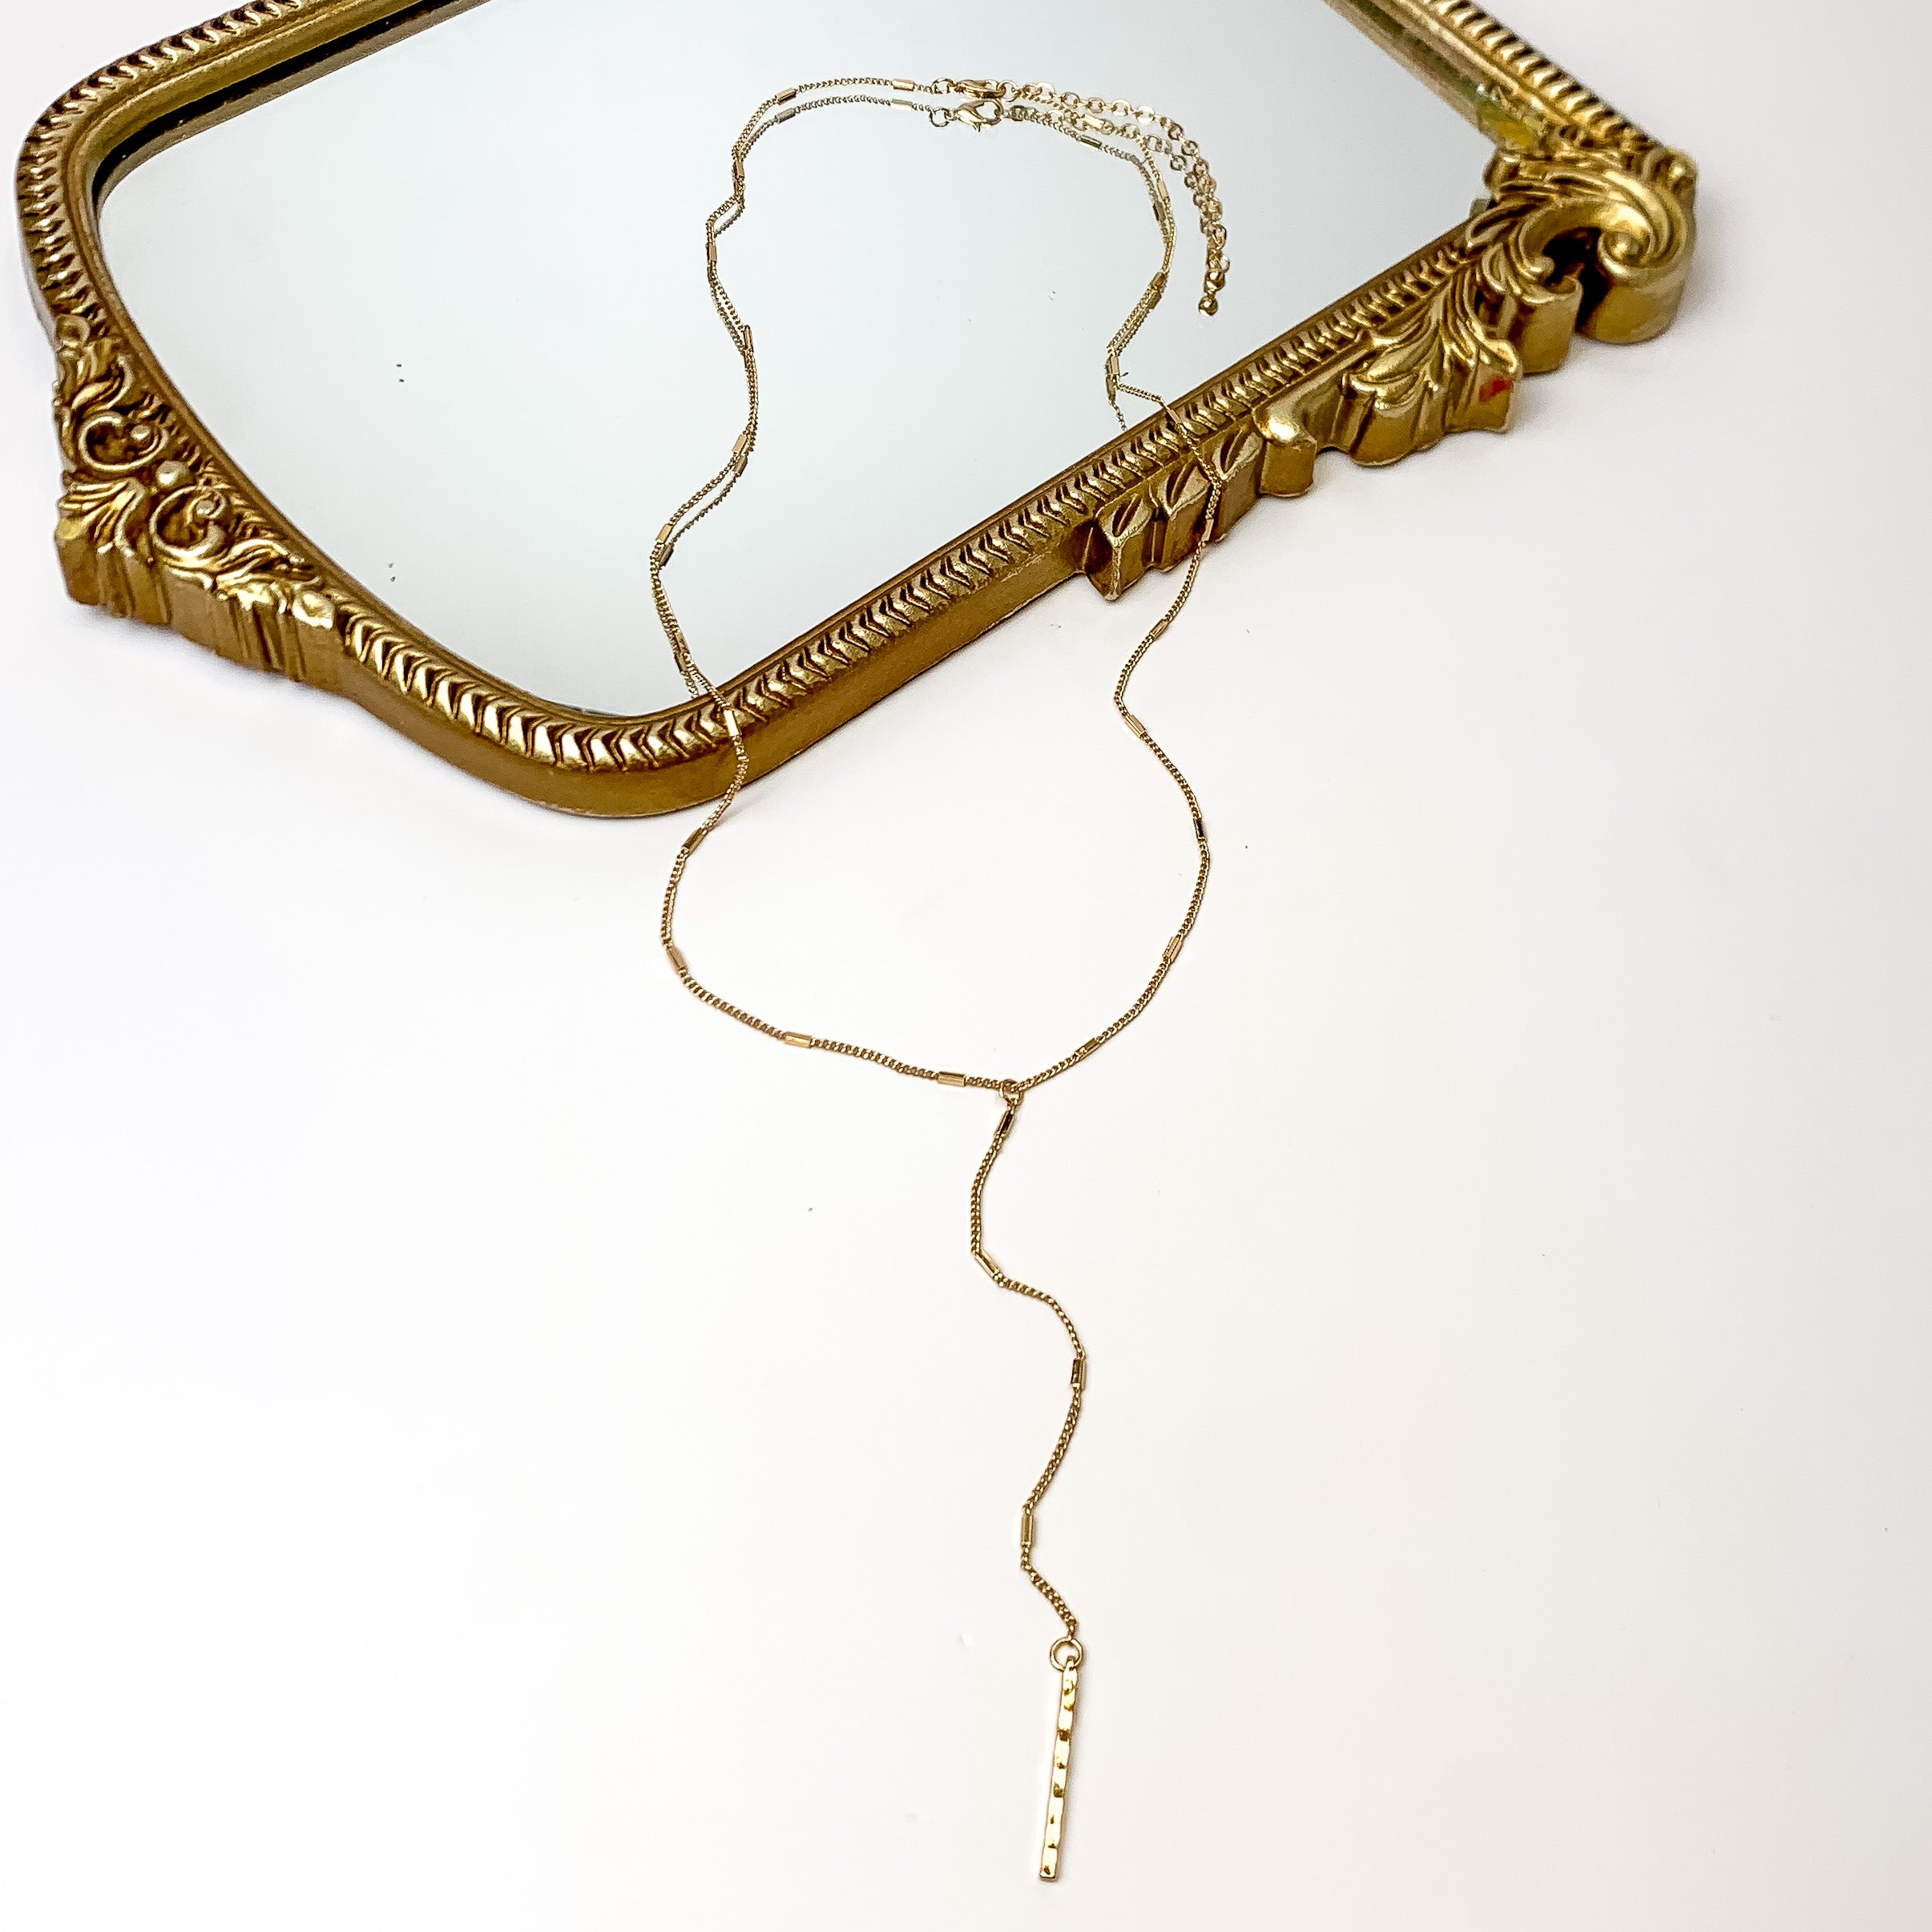 Gold Tone Y Necklace With Hammered Rectangle Charms. Pictured on a white background with the necklace laying on a mirror.